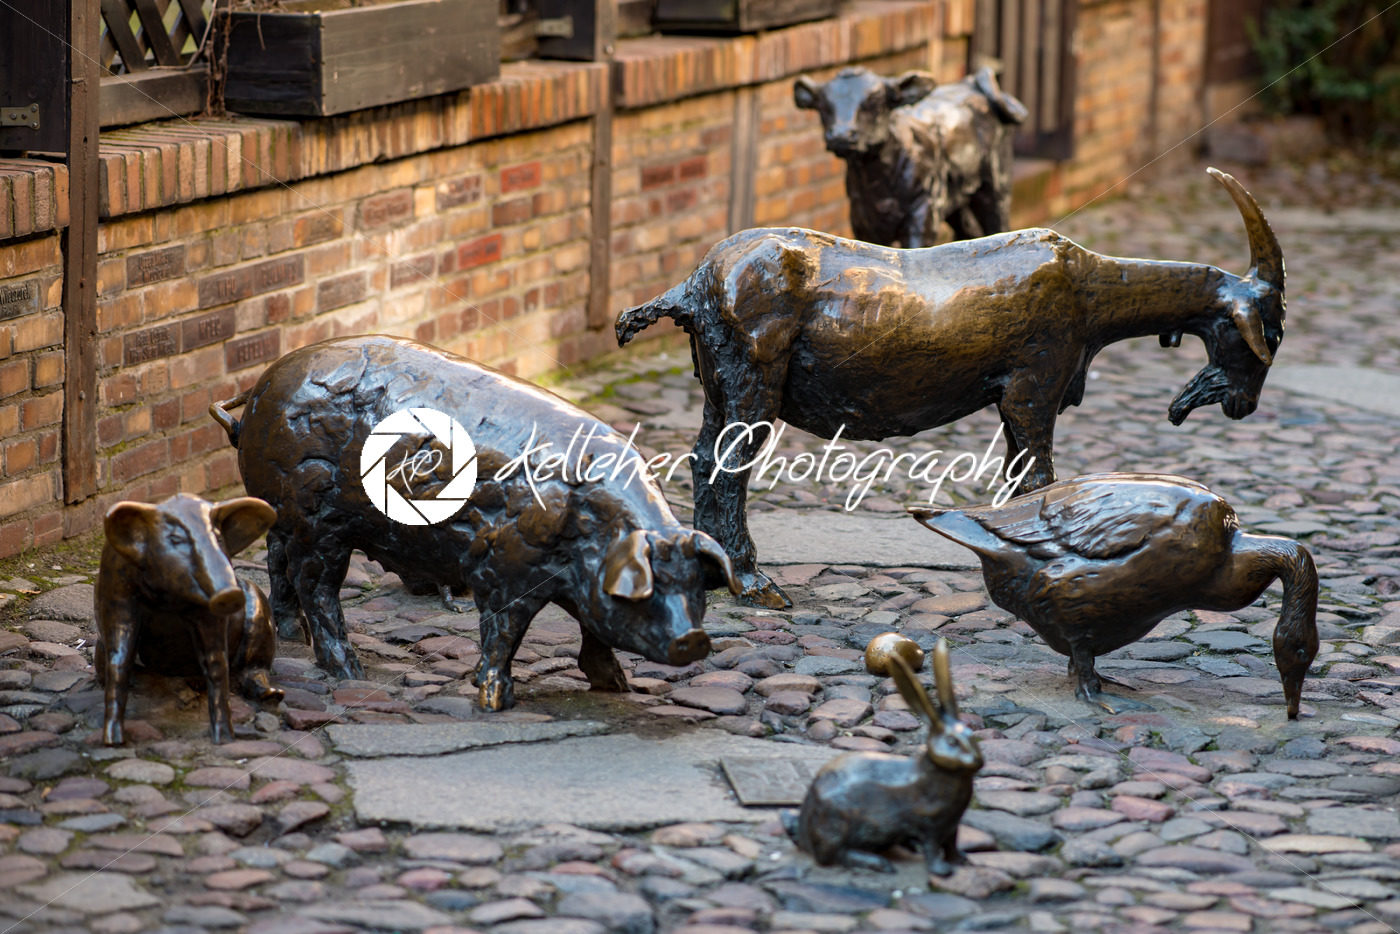 Wroclaw, Poland – March 9, 2018: Massacre of Wroclaw, bronze statue of the slaughter animals in the place of a medieval butcher - Kelleher Photography Store